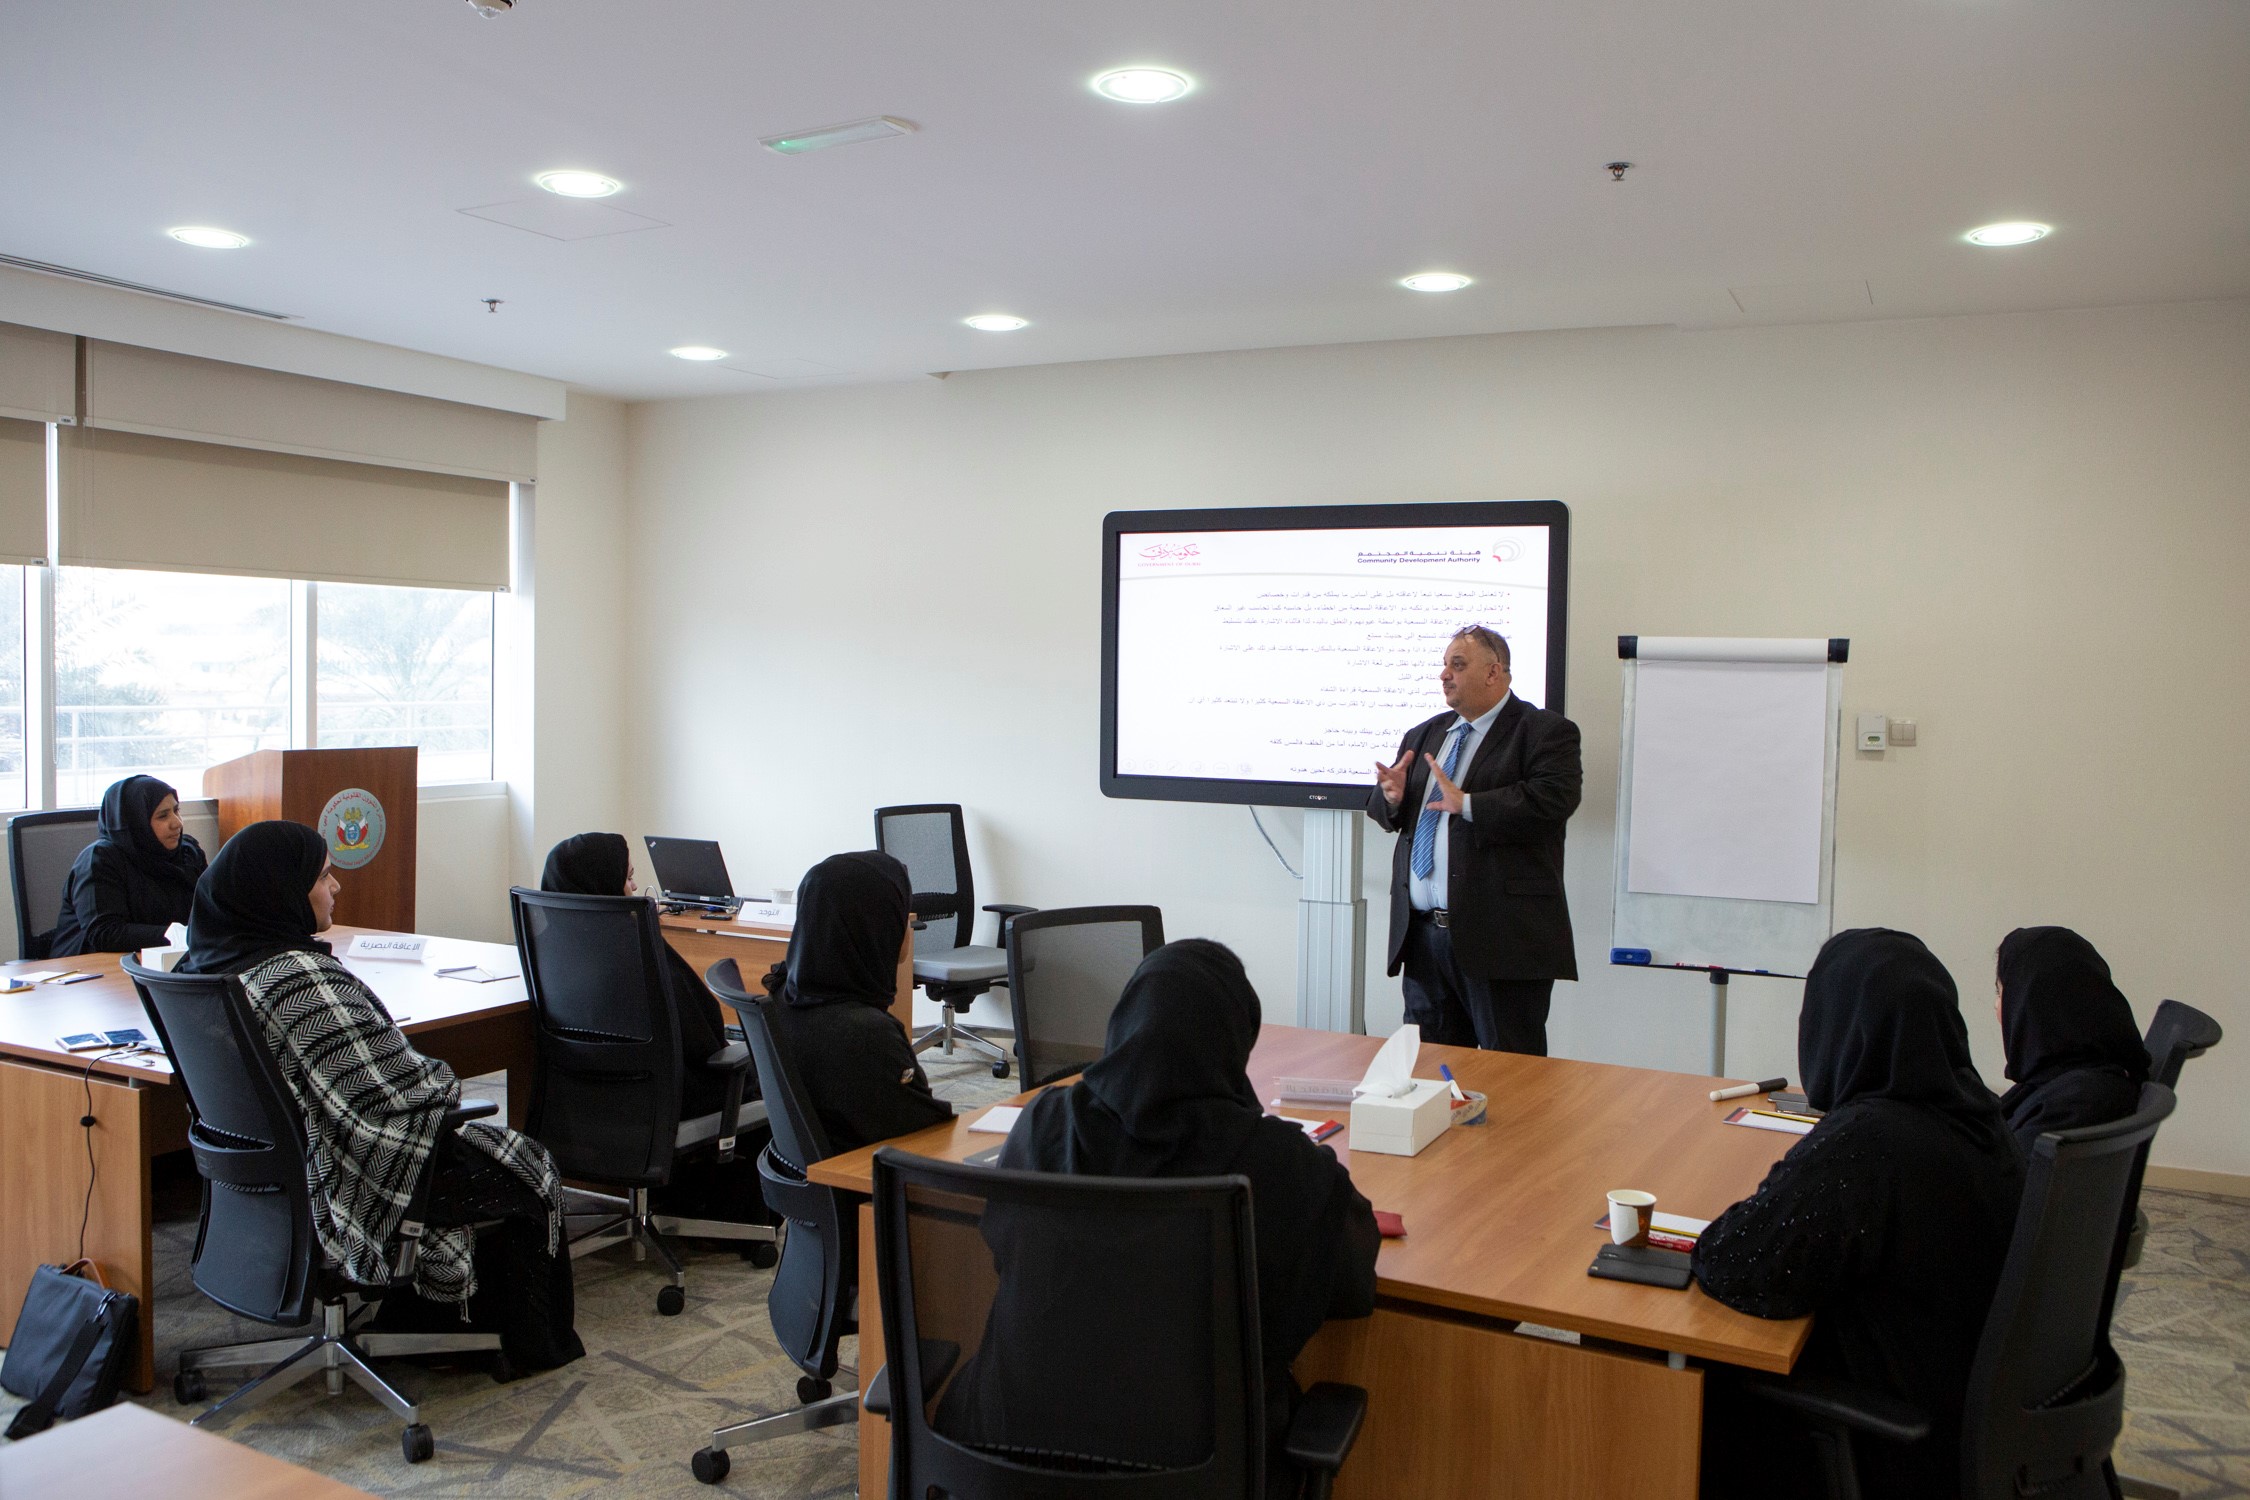  The Government of Dubai Legal Affairs Department organises a training course for its employees on how to use sign language  